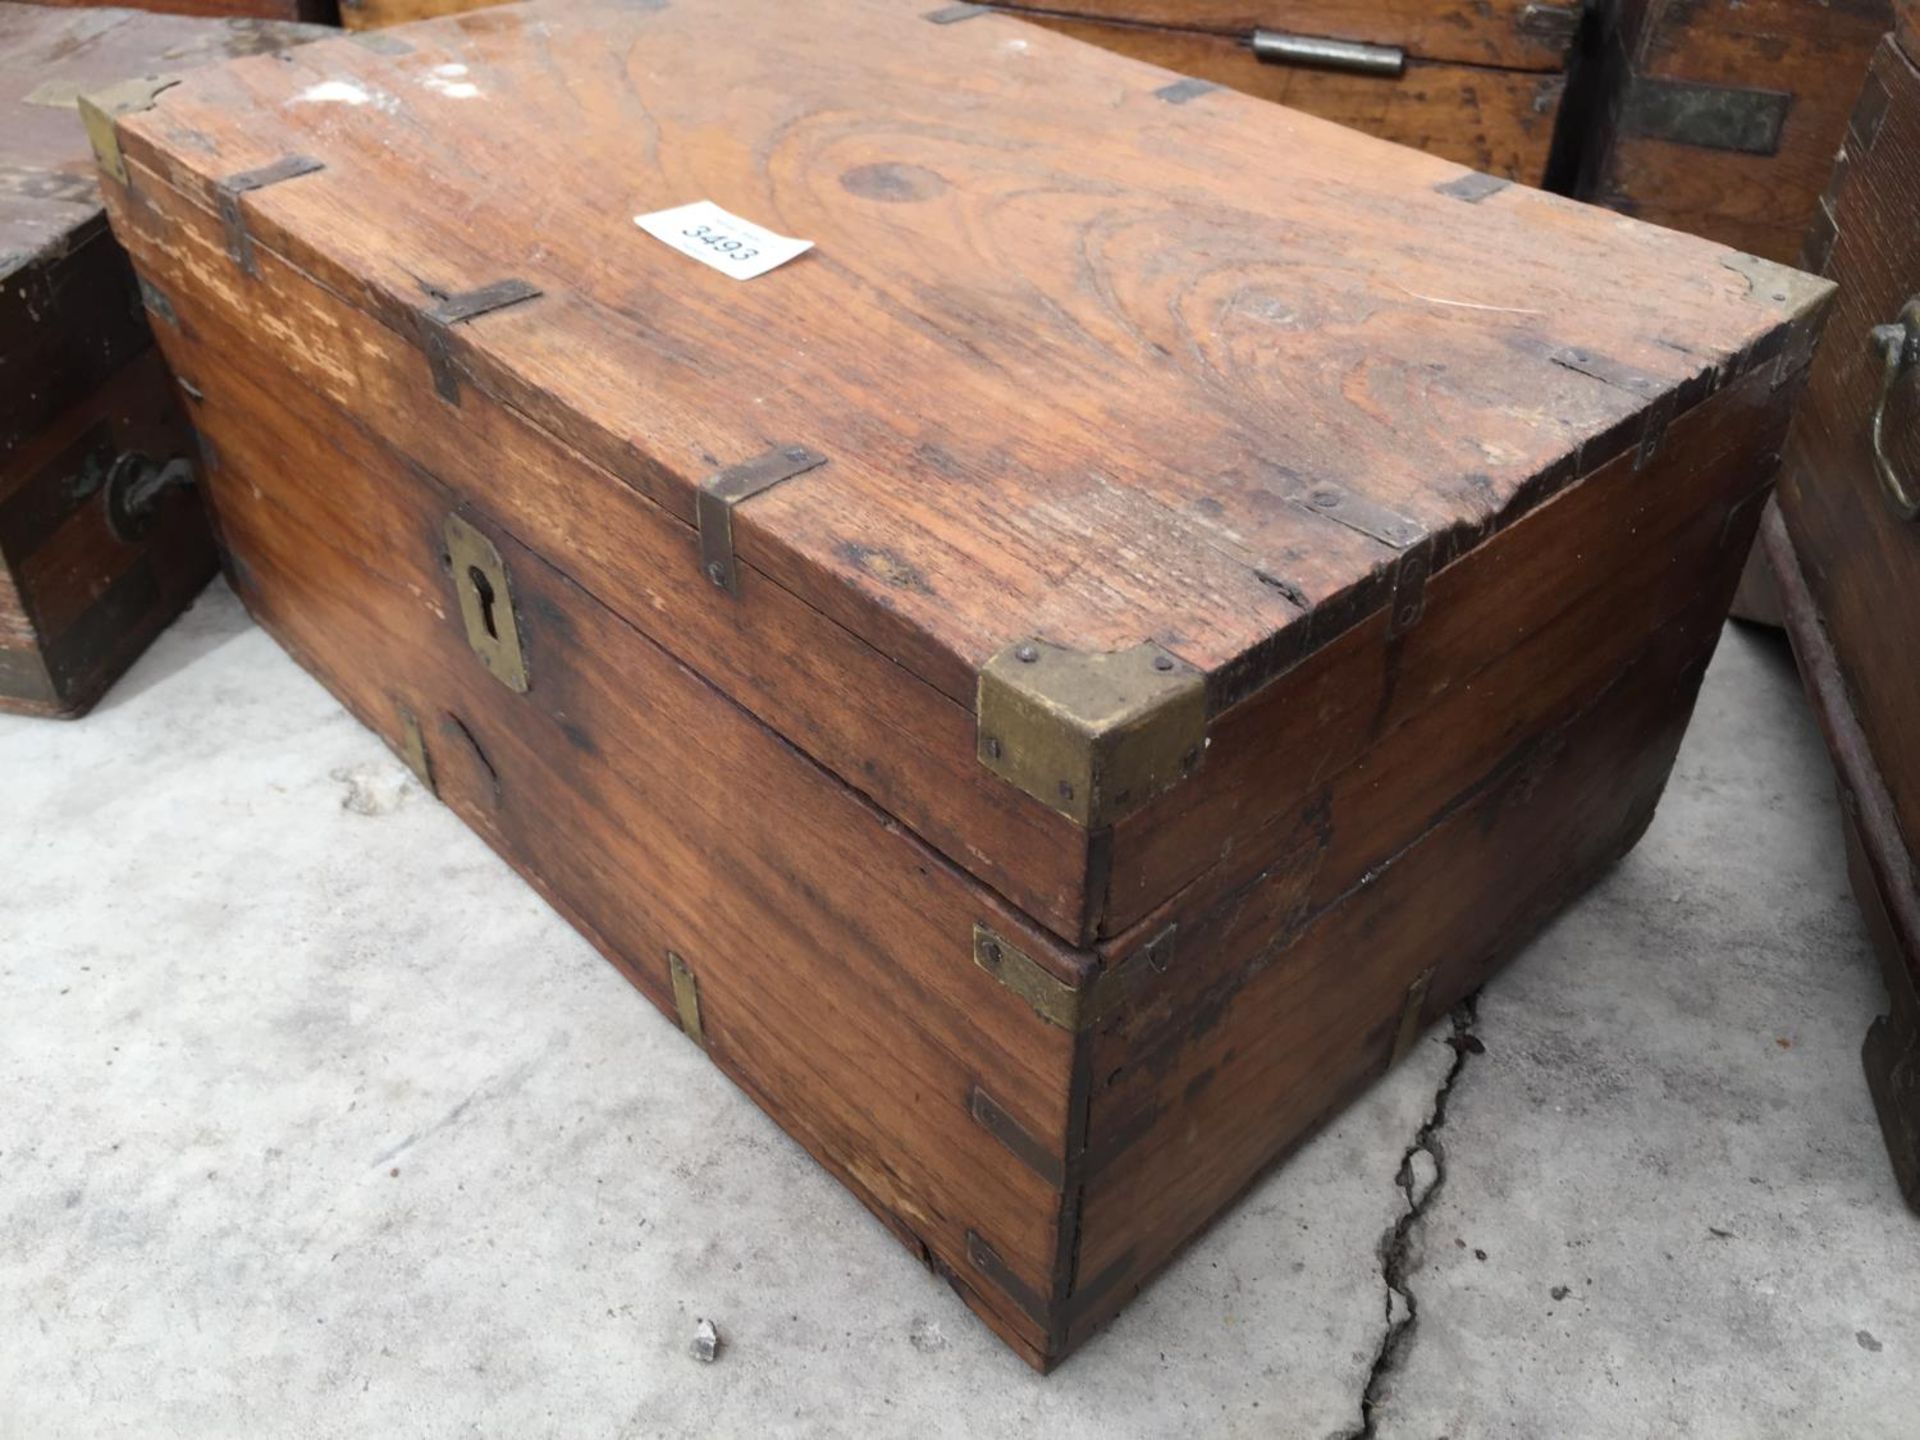 AN INDIAN HARDWOOD BOX WITH BRASS STRAPS, 14" WIDE - Image 2 of 3